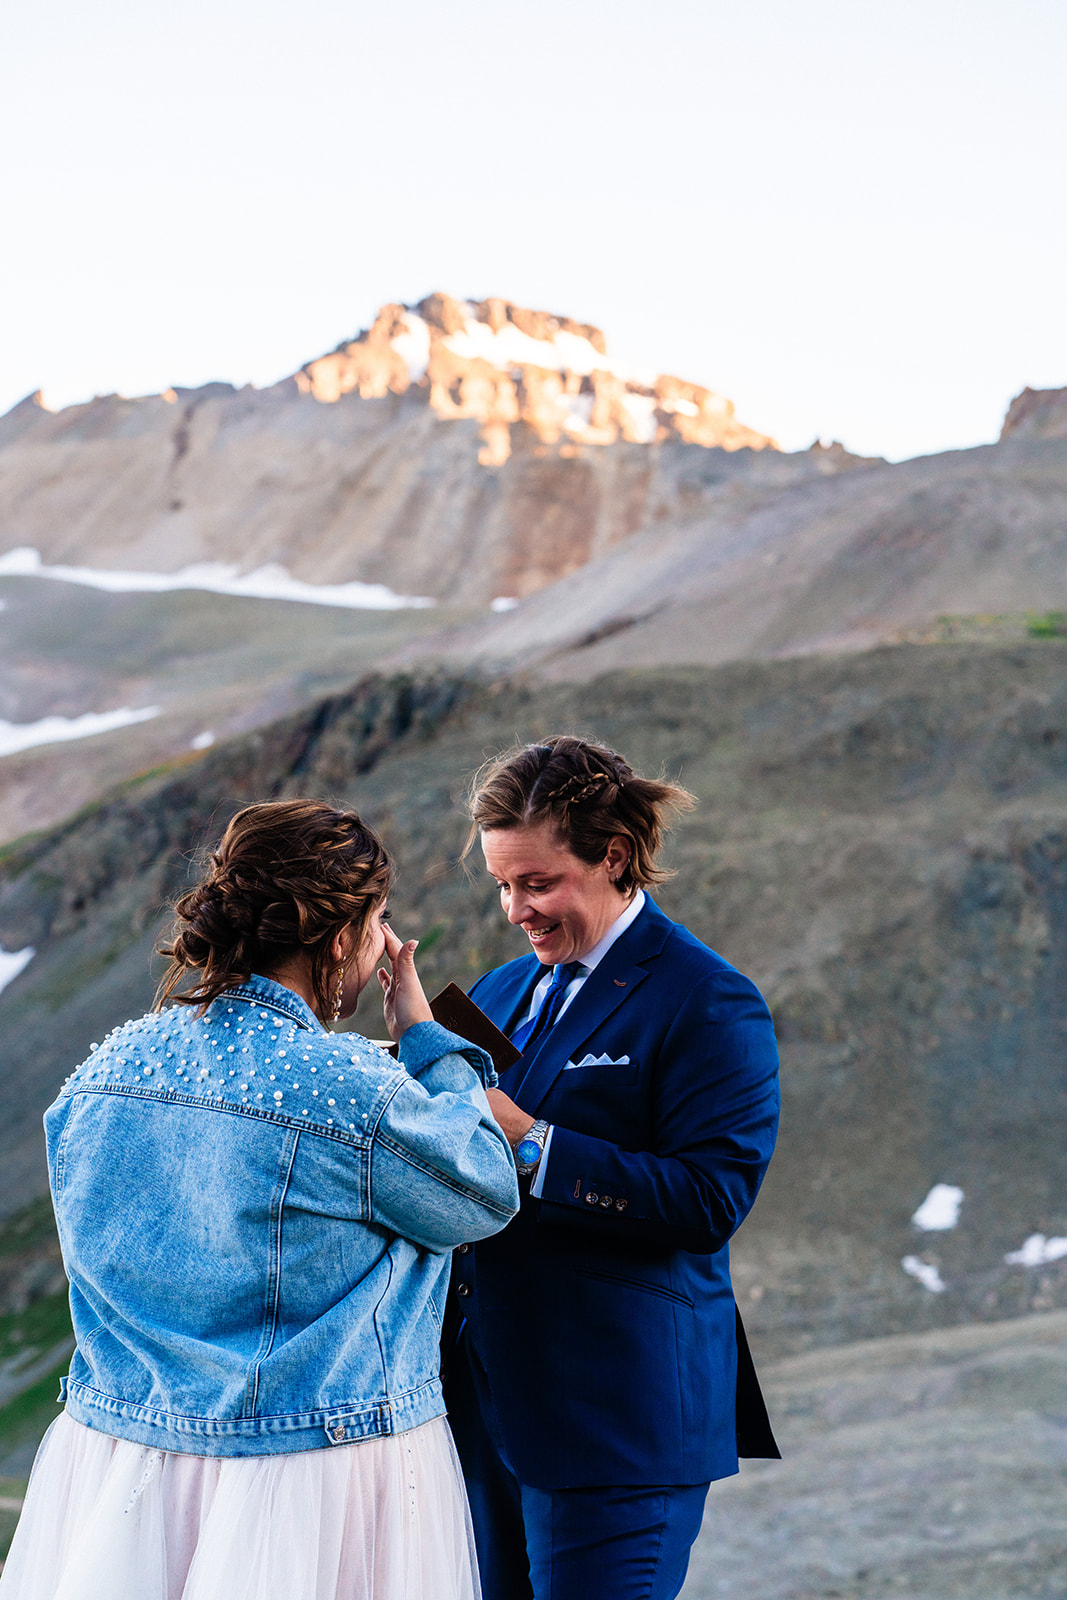 Lesbian couple exchanging vows during sunset